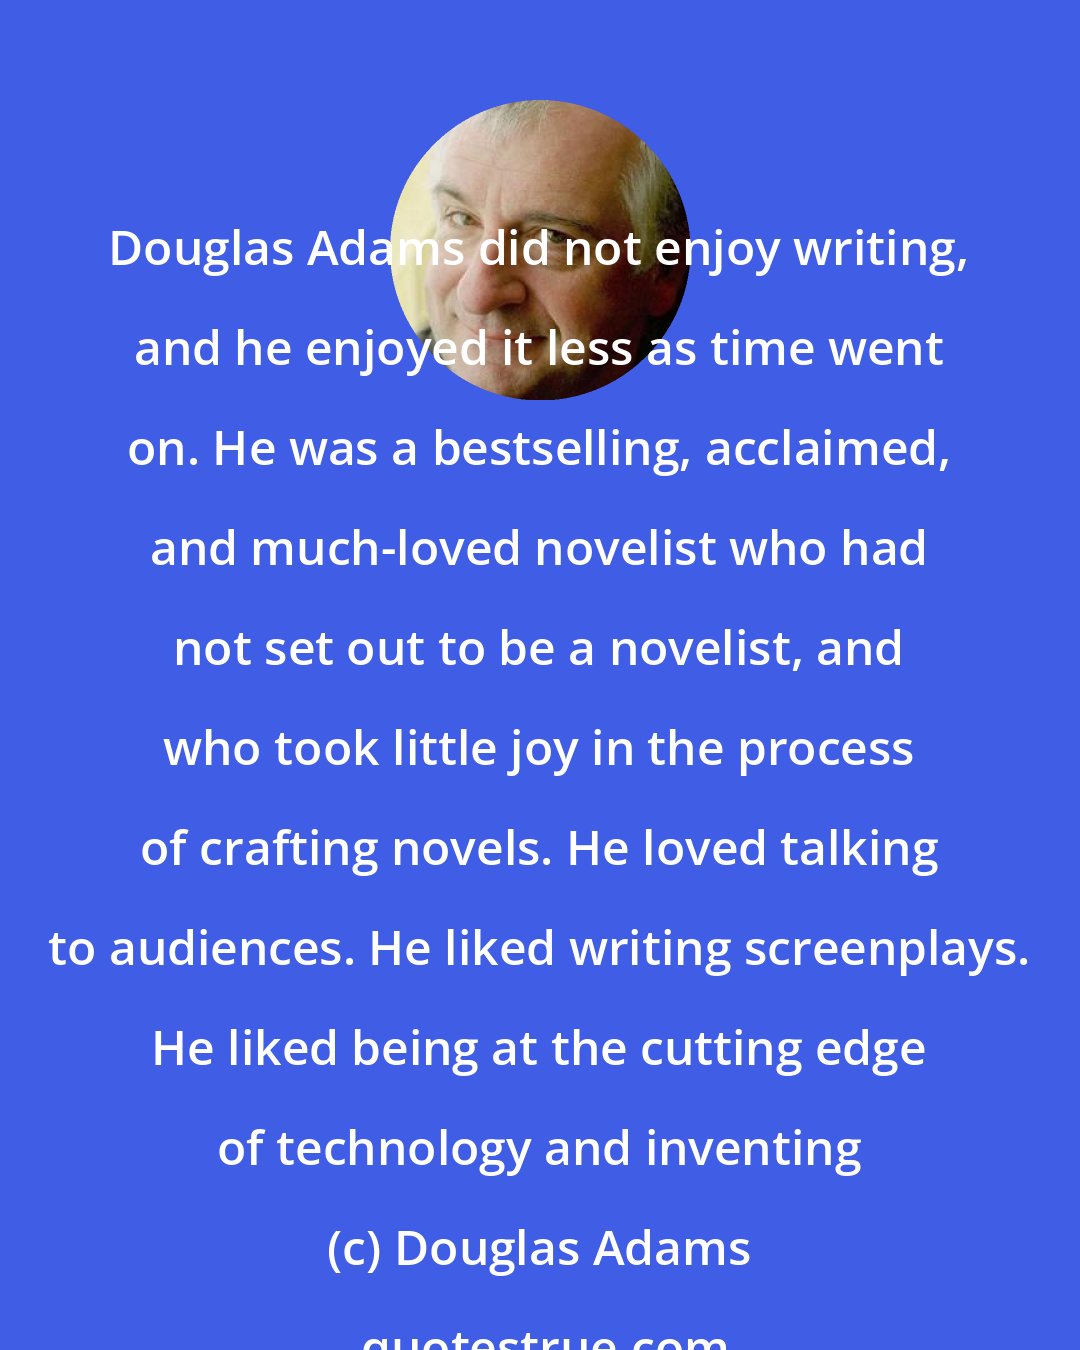 Douglas Adams: Douglas Adams did not enjoy writing, and he enjoyed it less as time went on. He was a bestselling, acclaimed, and much-loved novelist who had not set out to be a novelist, and who took little joy in the process of crafting novels. He loved talking to audiences. He liked writing screenplays. He liked being at the cutting edge of technology and inventing